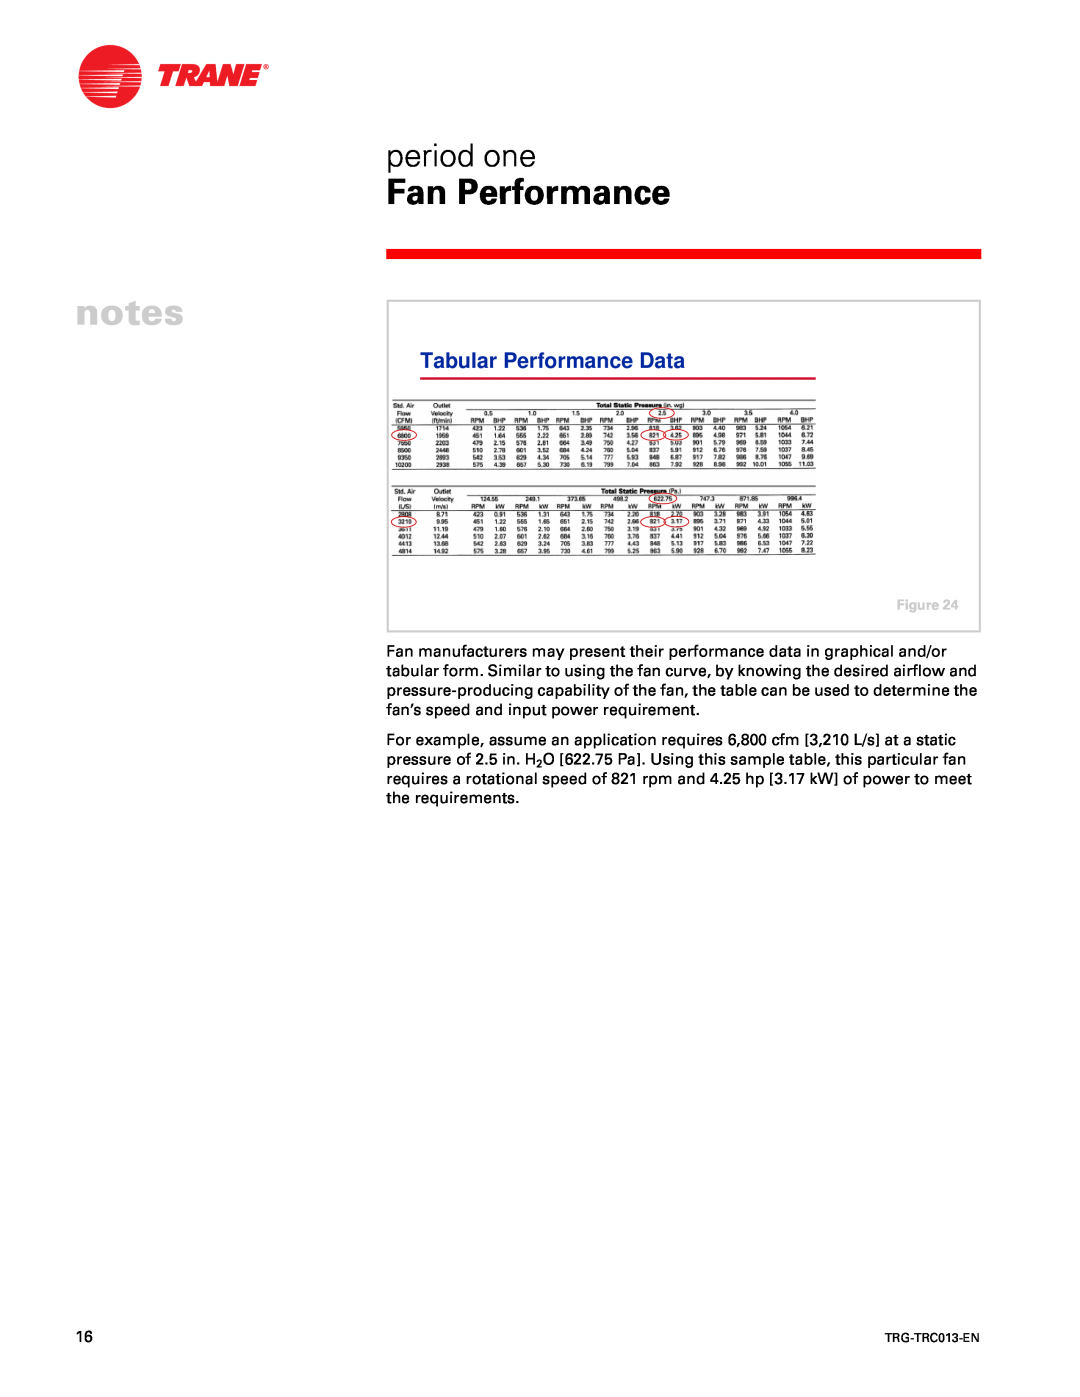 Trane TRG-TRC013-EN manual Tabular Performance Data, Pp” -p”, fan’s speed and input power requirement, g EG 